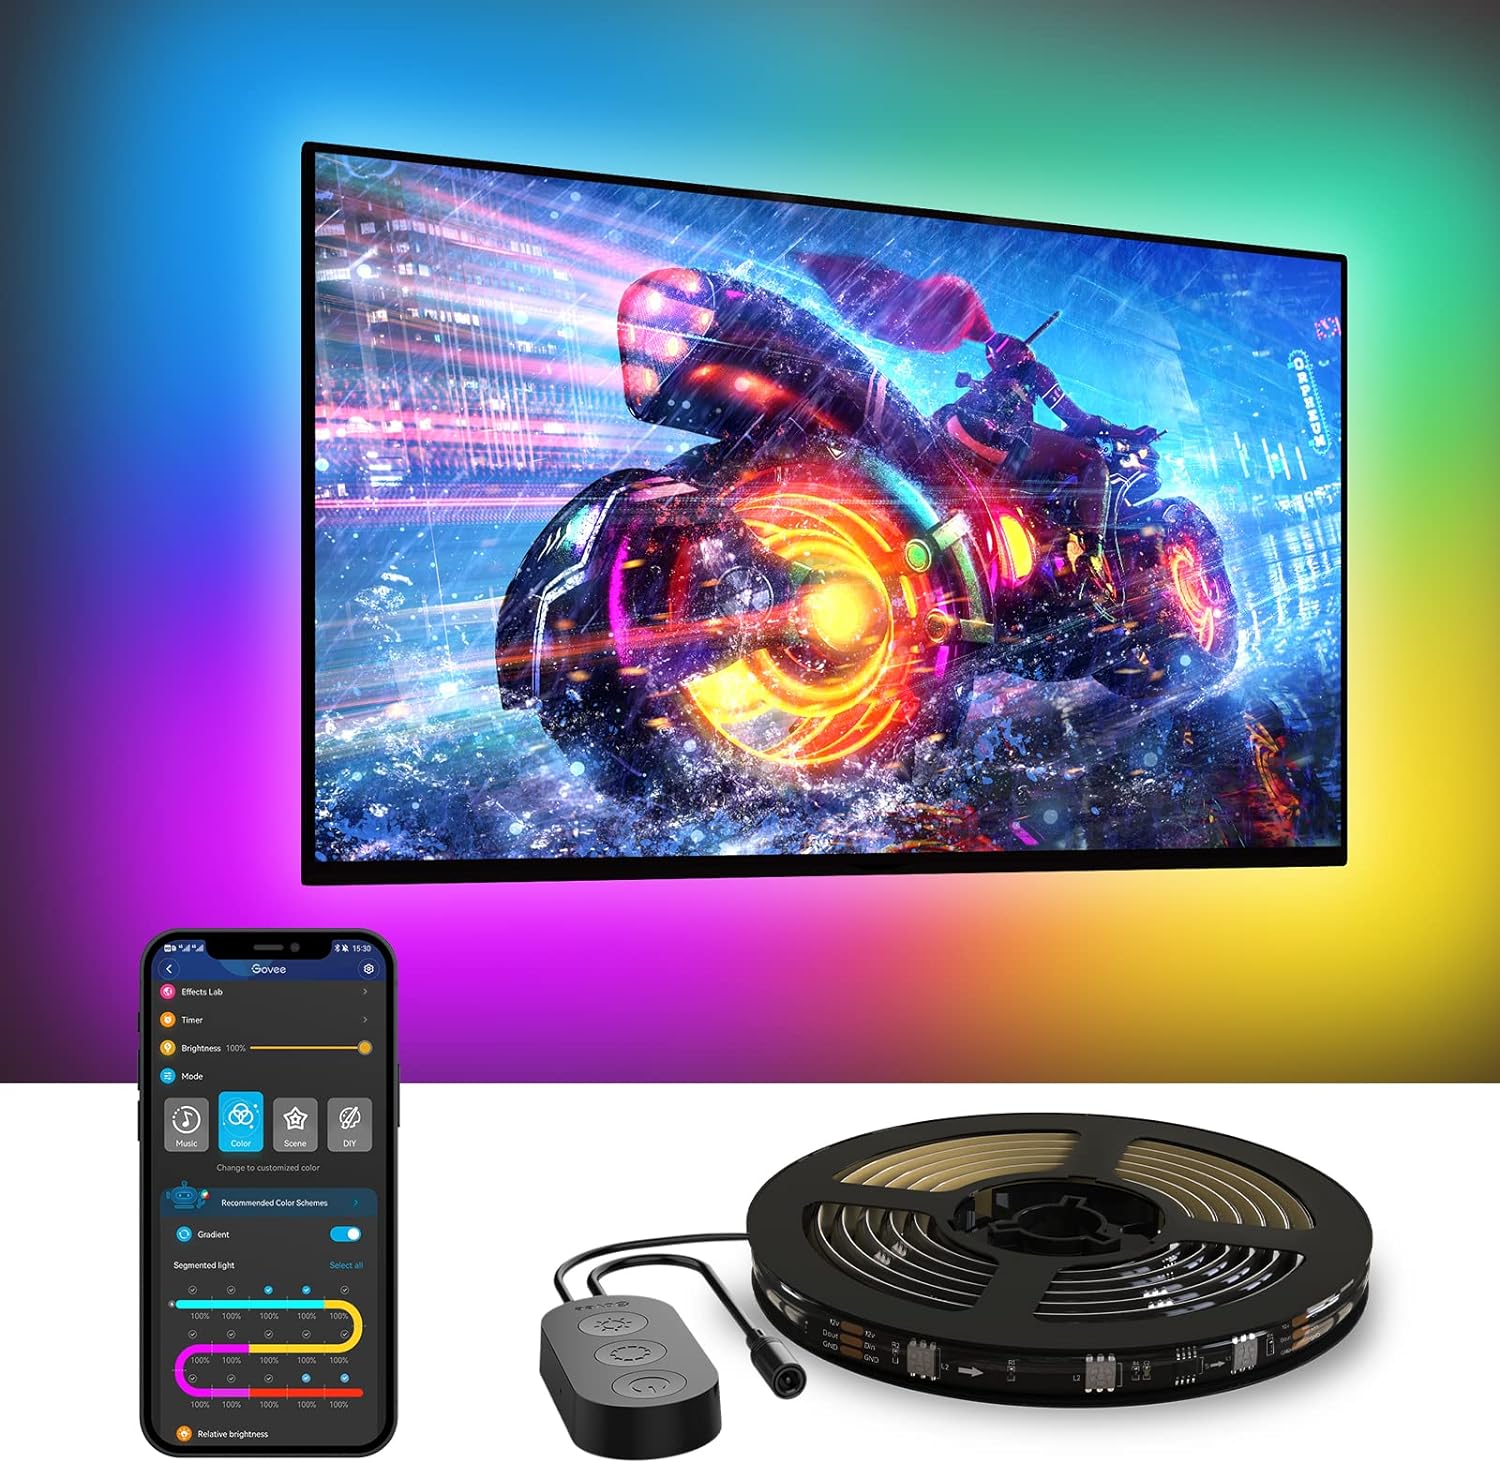 Govee TV LED Backlight, RGBIC TV Backlight for 55-65 inch TVs, Smart LED Lights for TV with Bluetooth and Wi-Fi Control, Works with Alexa & Google Assistant, Music Sync, 99  Scene Modes, Adapter